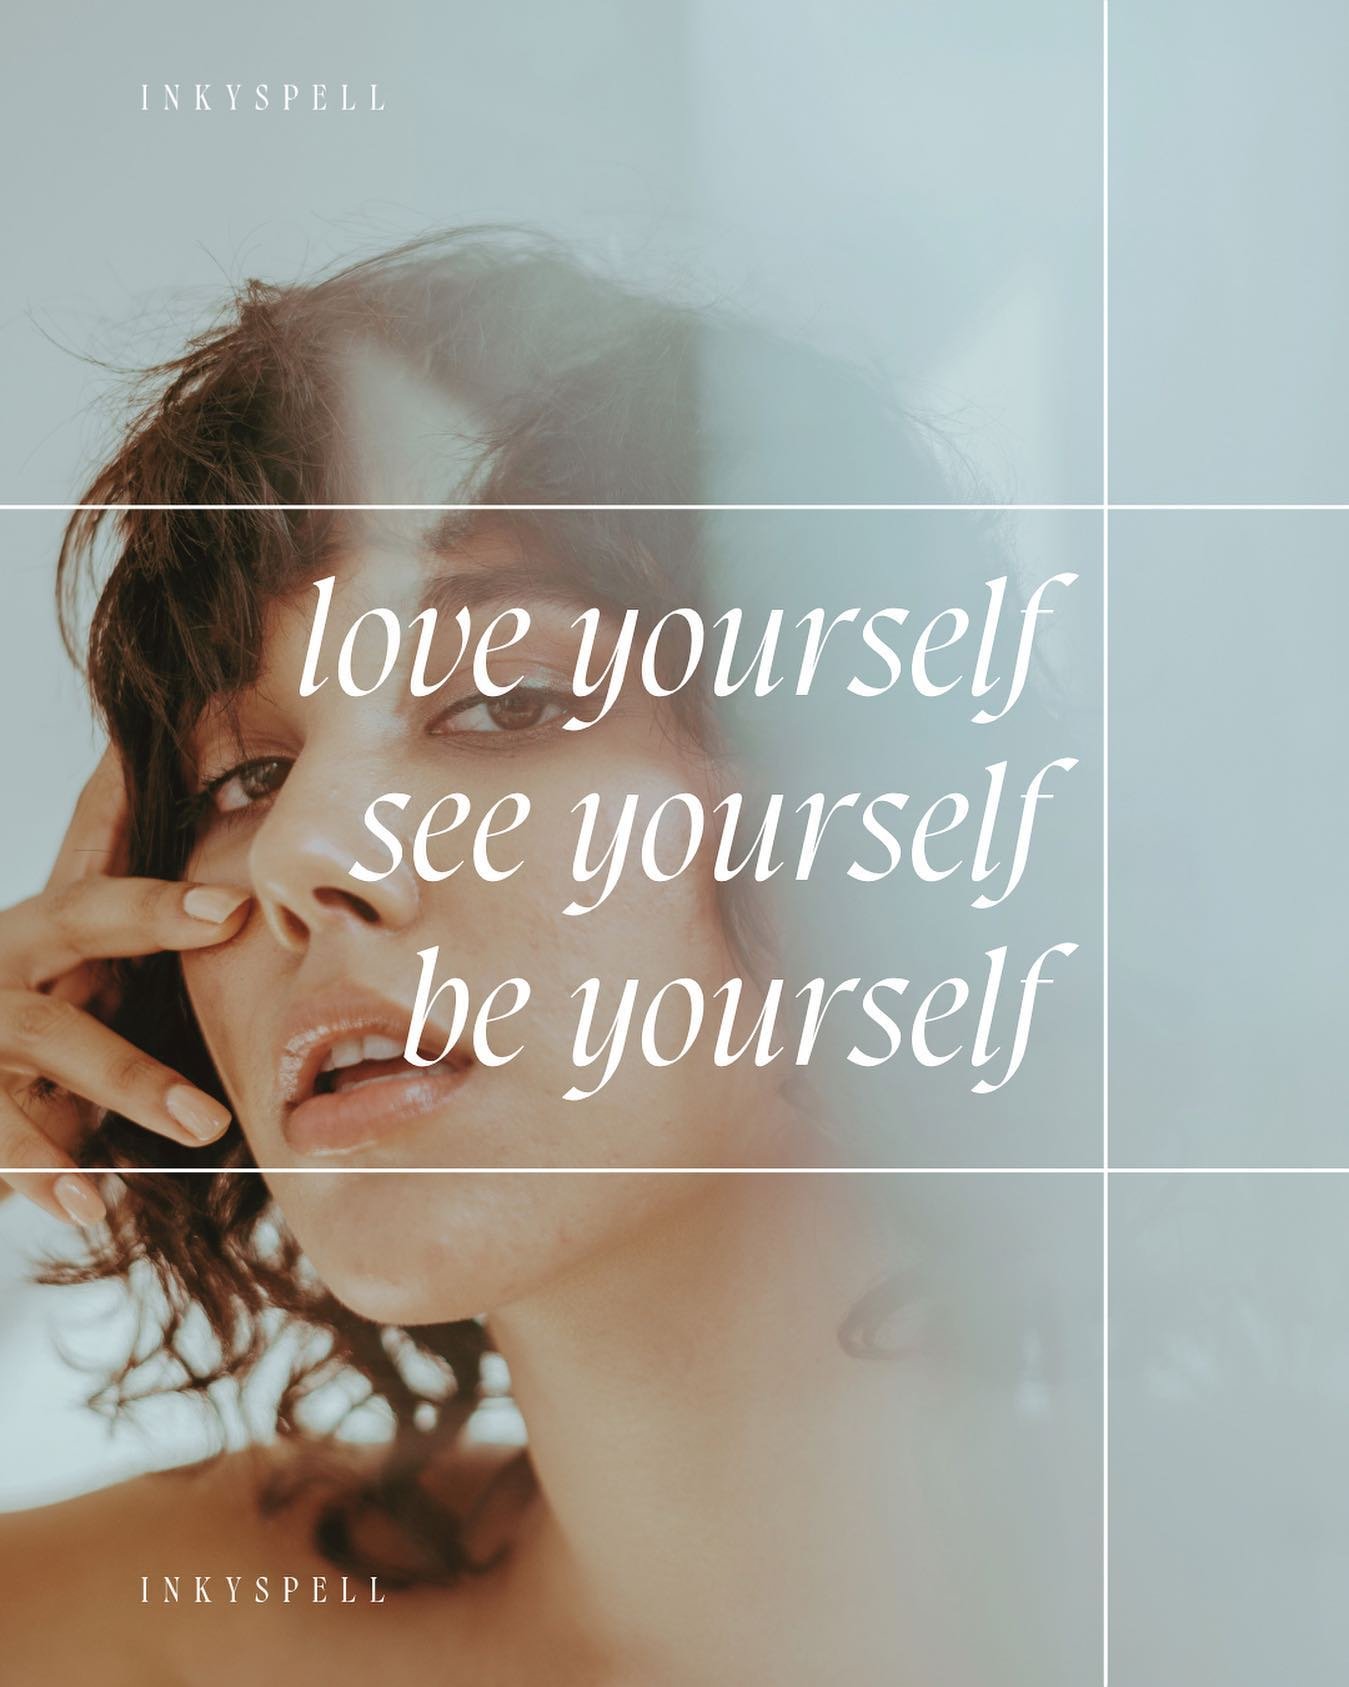 ~ 🤍 ~

#love #loveyourself #see #seeyourself #be #beyourself #inspo #quotes #typedesign #typography #jenwagnerco #promenade #branddesign #design #designer #selflove #livingcreatively